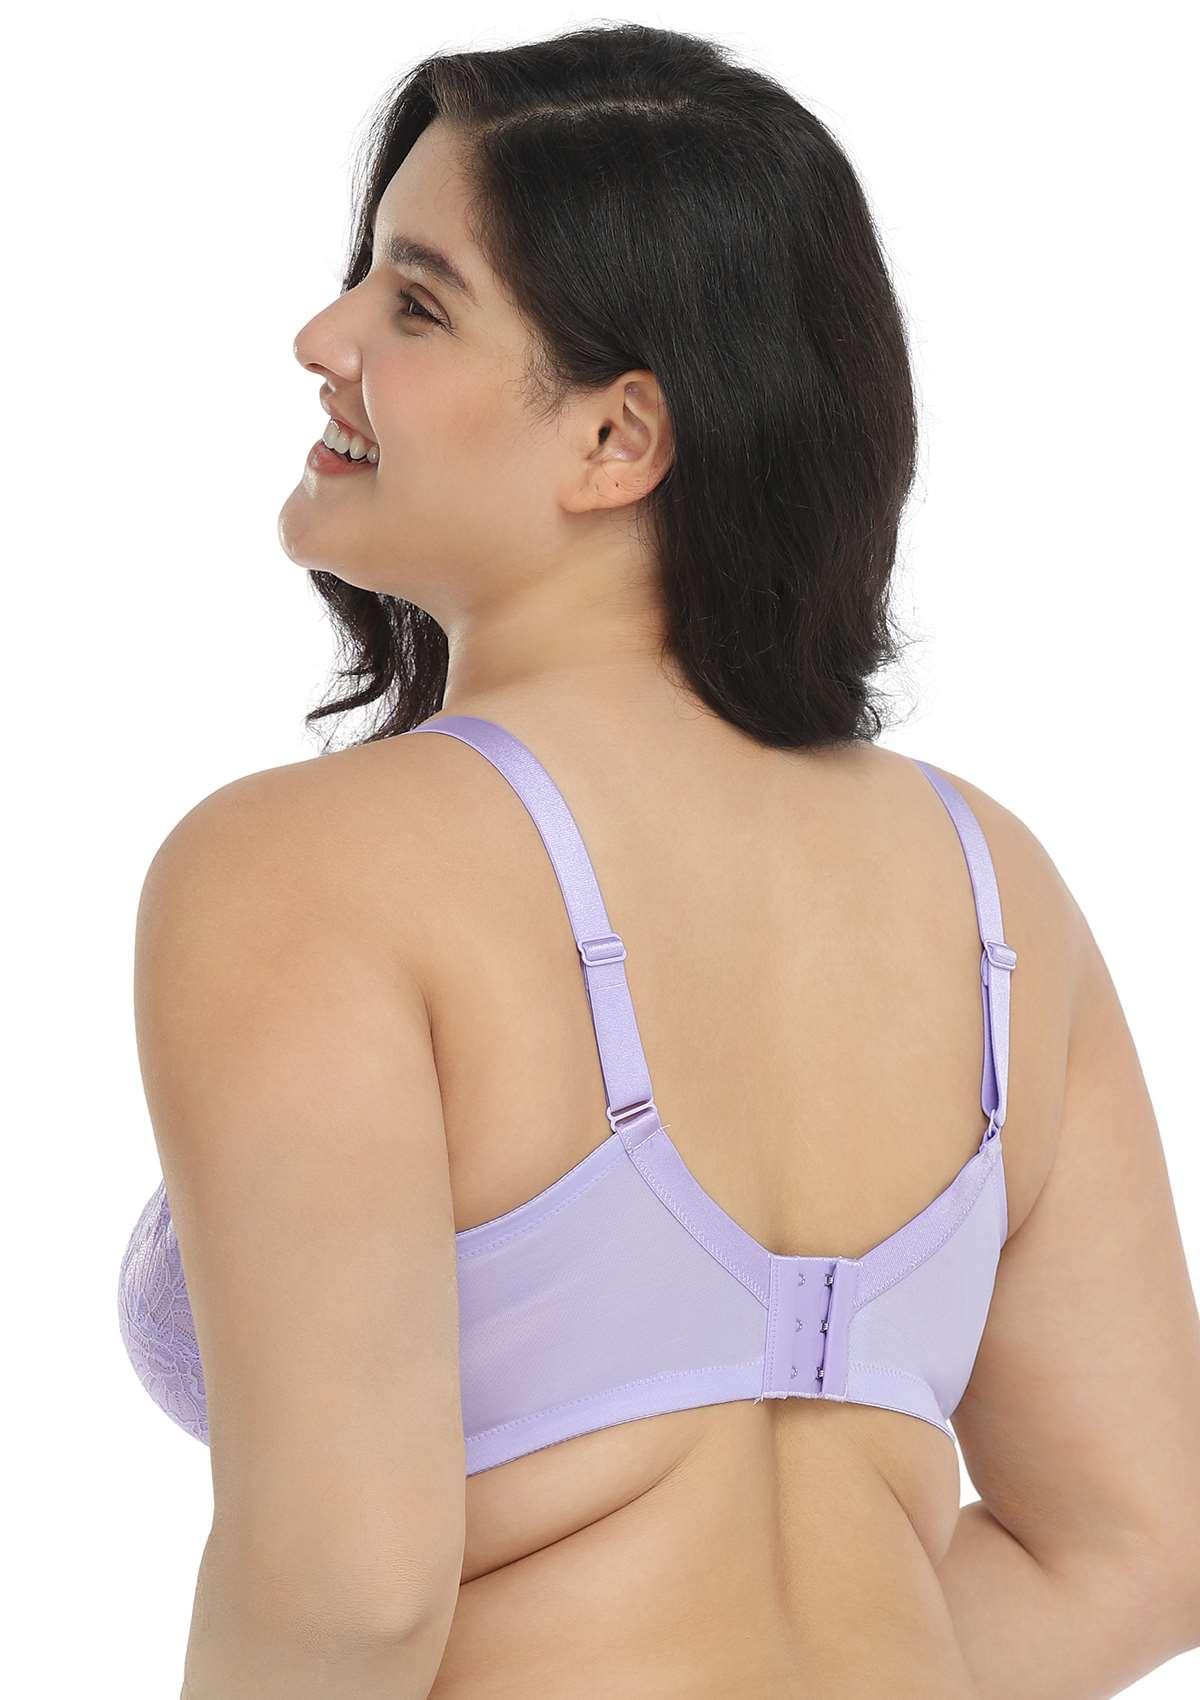 HSIA Blossom Transparent Lace Bra: Plus Size Wired Back Smoothing Bra - Light Purple / 42 / G